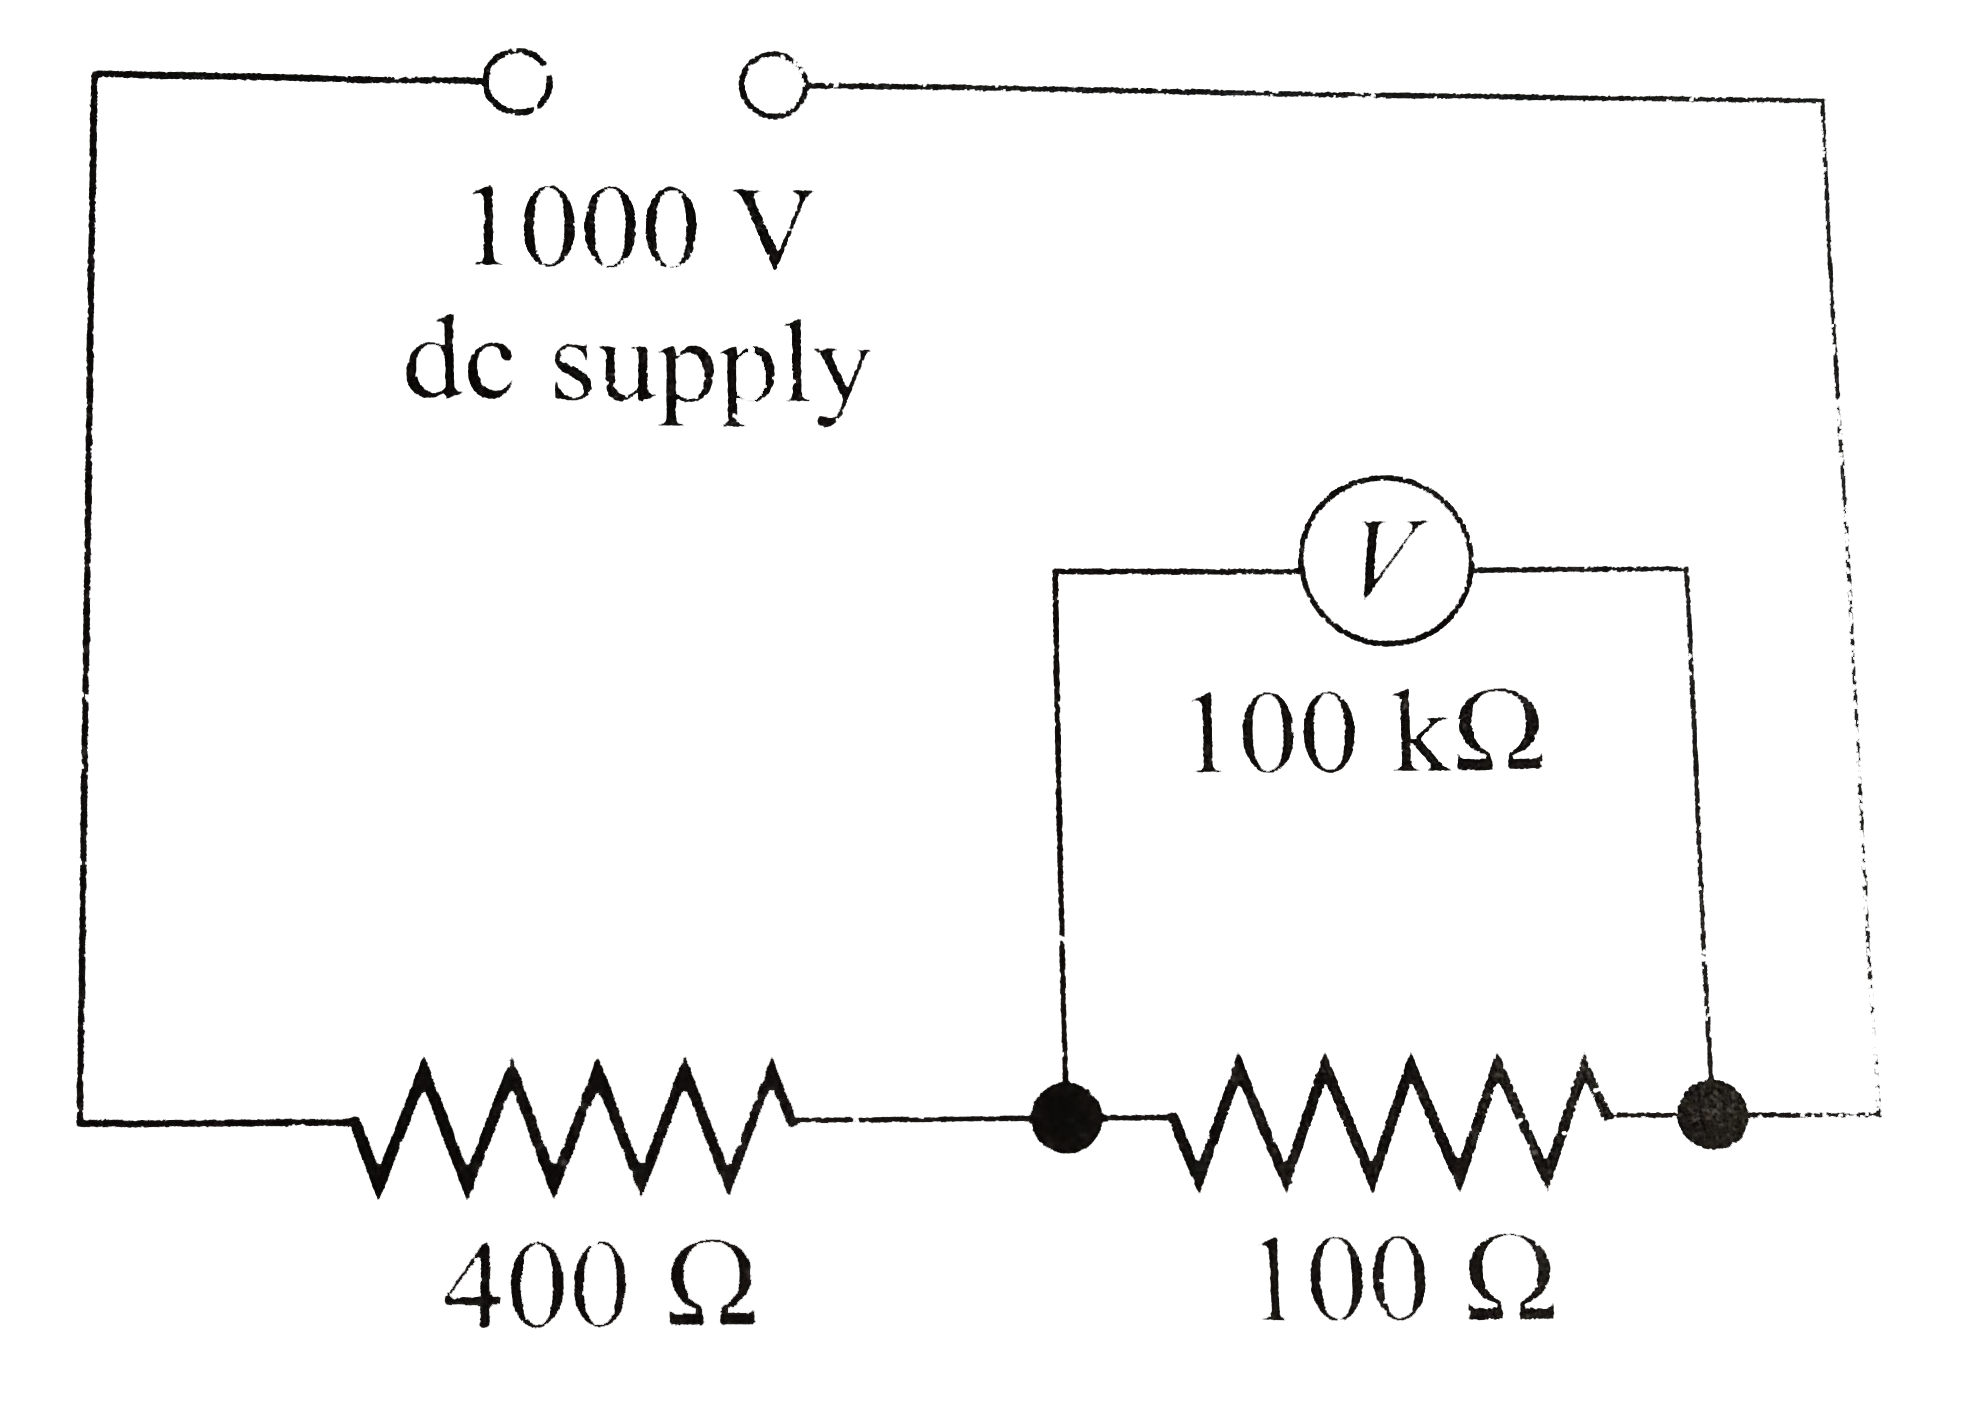 A constant voltage dc source is connected, as shown in Fig. A2.7, across two resistors of resistances 400 kOmega and 100 k Omega. What is the reading of the voltmeter, also of resistance 100 kOmega, when connected across the second resistor as shown?